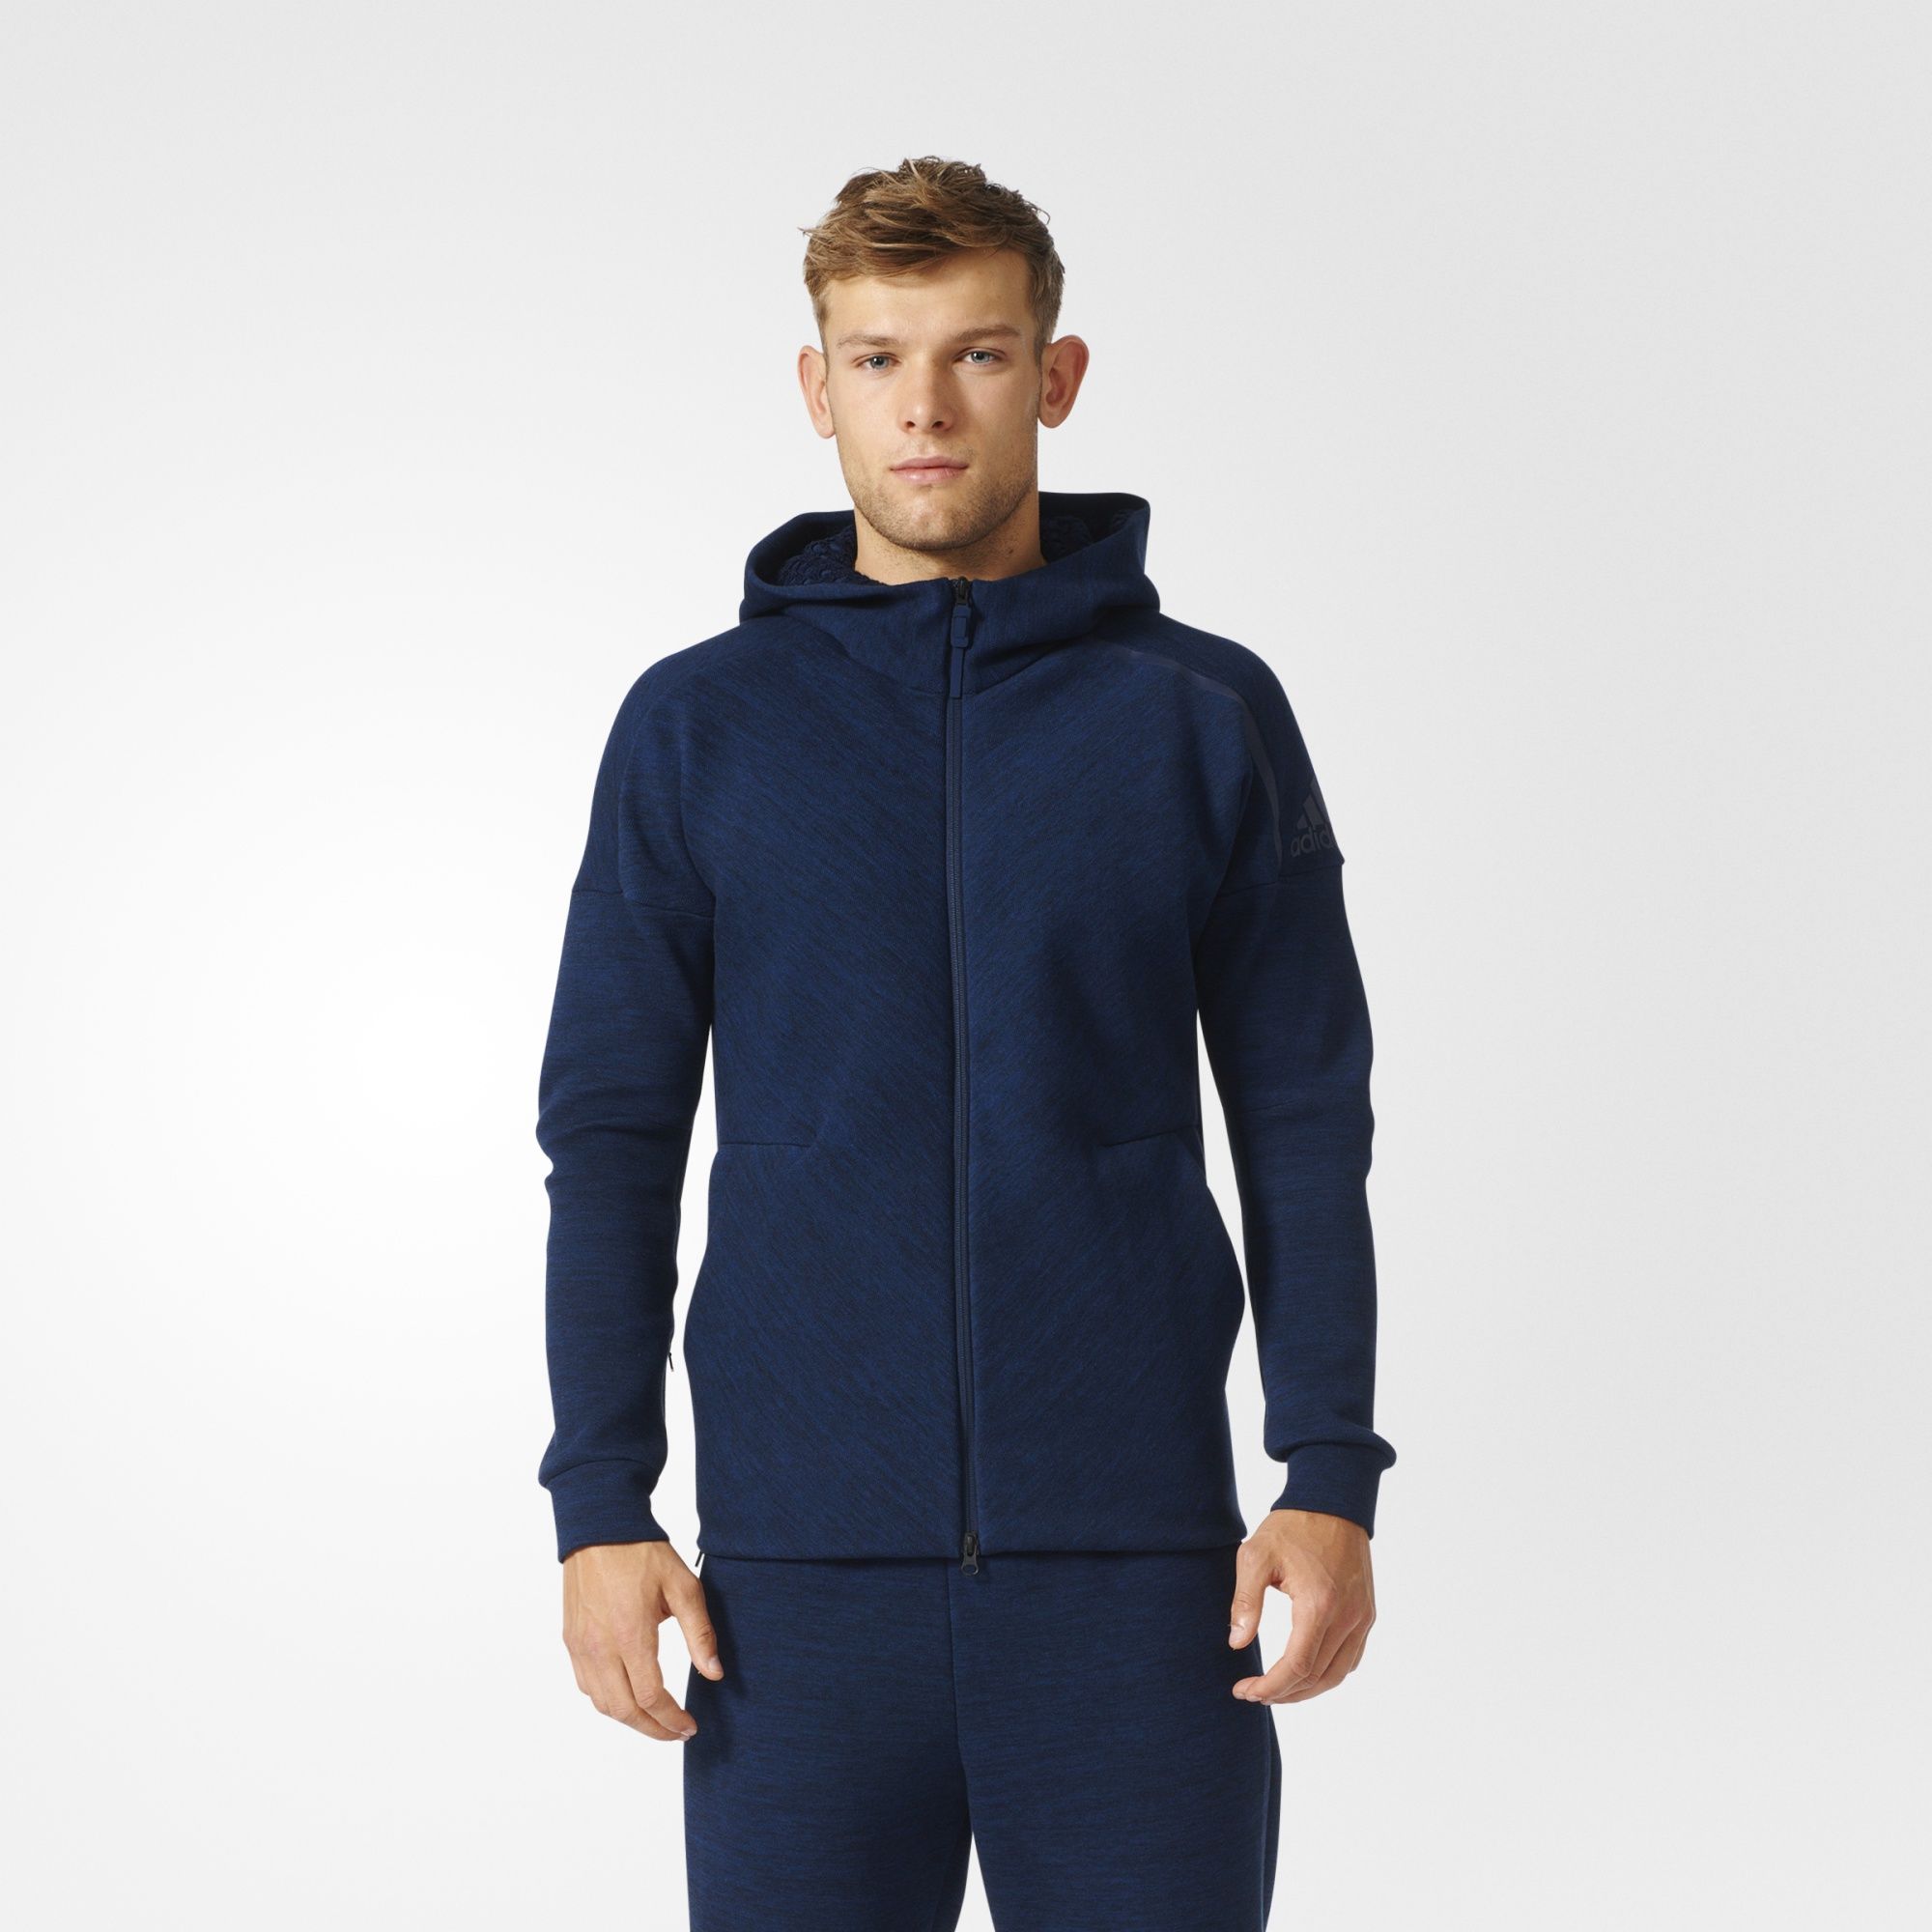 passagier waarde Farmacologie adidas alerts on Twitter: "Now available on #adidas US. adidas ZNE Travel  Hoodie. Use code BMSMNOV for $20 off. —&gt; https://t.co/Ou7ei4EQfN  https://t.co/wjIUZnmrsm" / Twitter